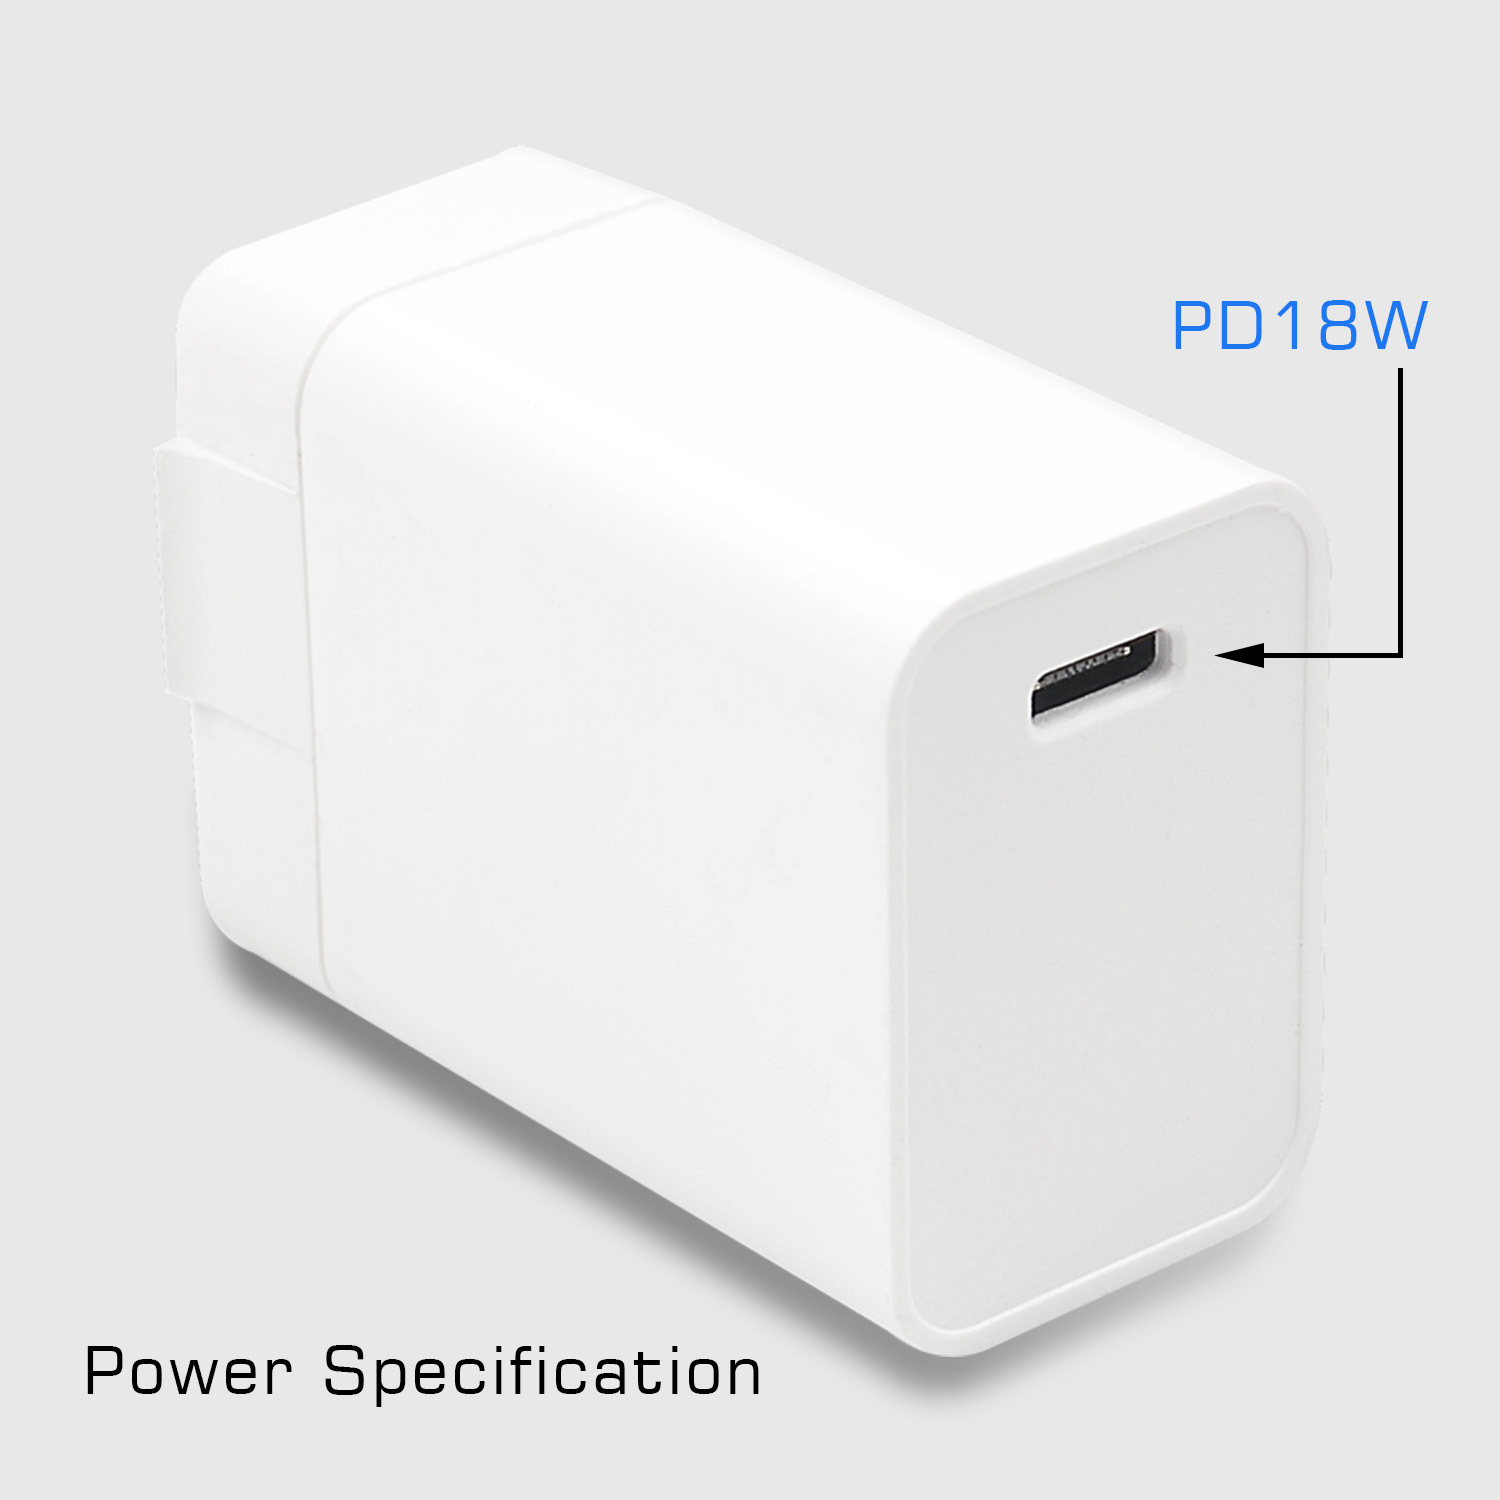 Bakeey-18W-PD-Fast-Charging-EU-Plug-Charger-Adapter-For-iPhone-X-XR-XS-Max-iPad-Mac-Book-Pocophone-1477448